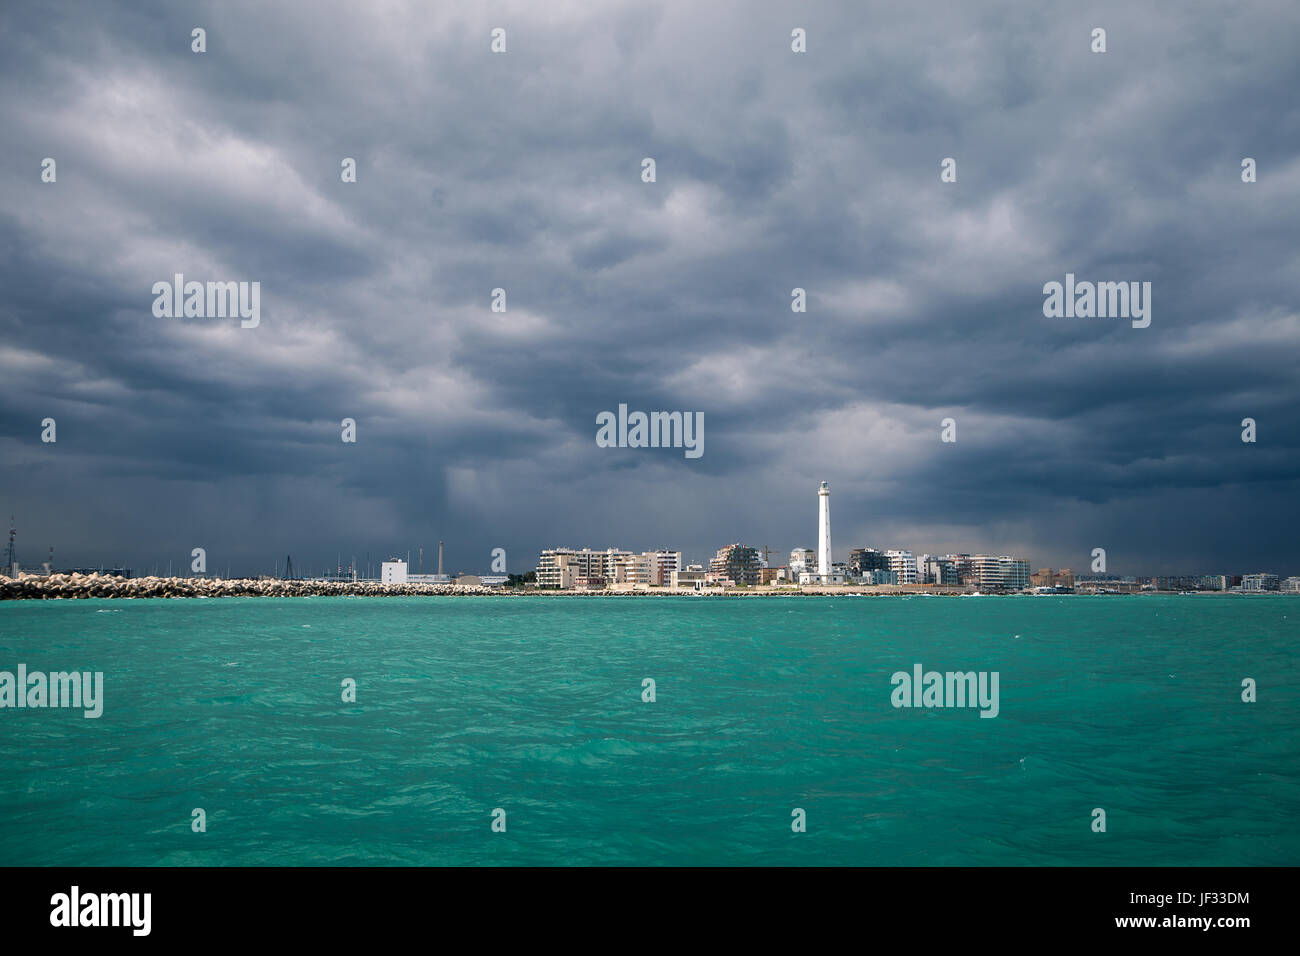 Lighthouse in a cloudy day with a storm approaching Stock Photo